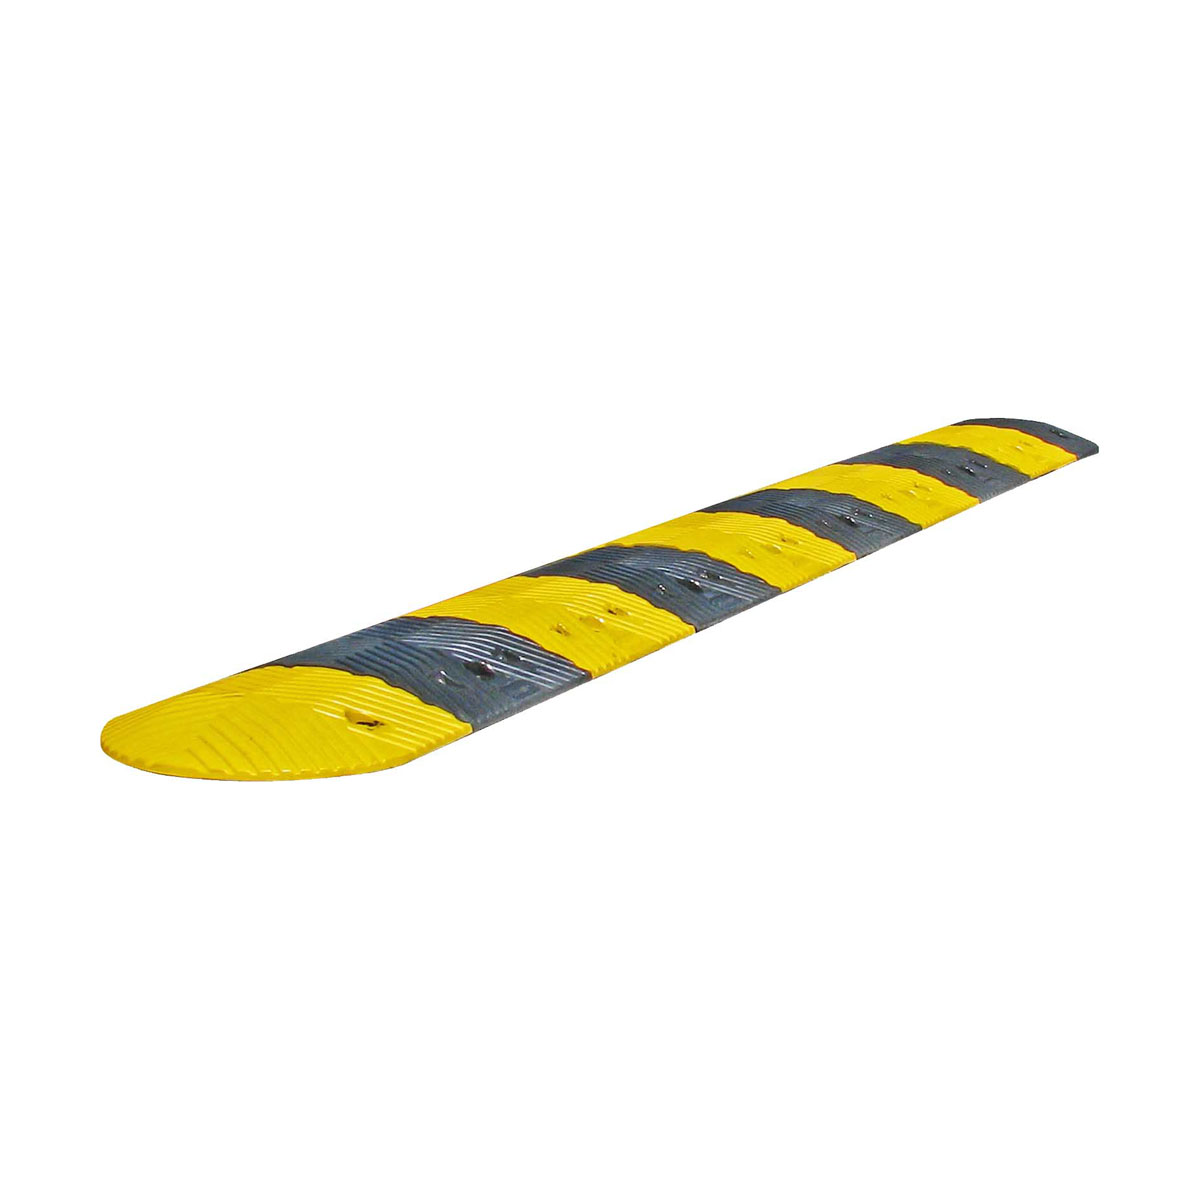 Buy Speed Hump Modules 50mm in Speed Humps from Astrolift NZ